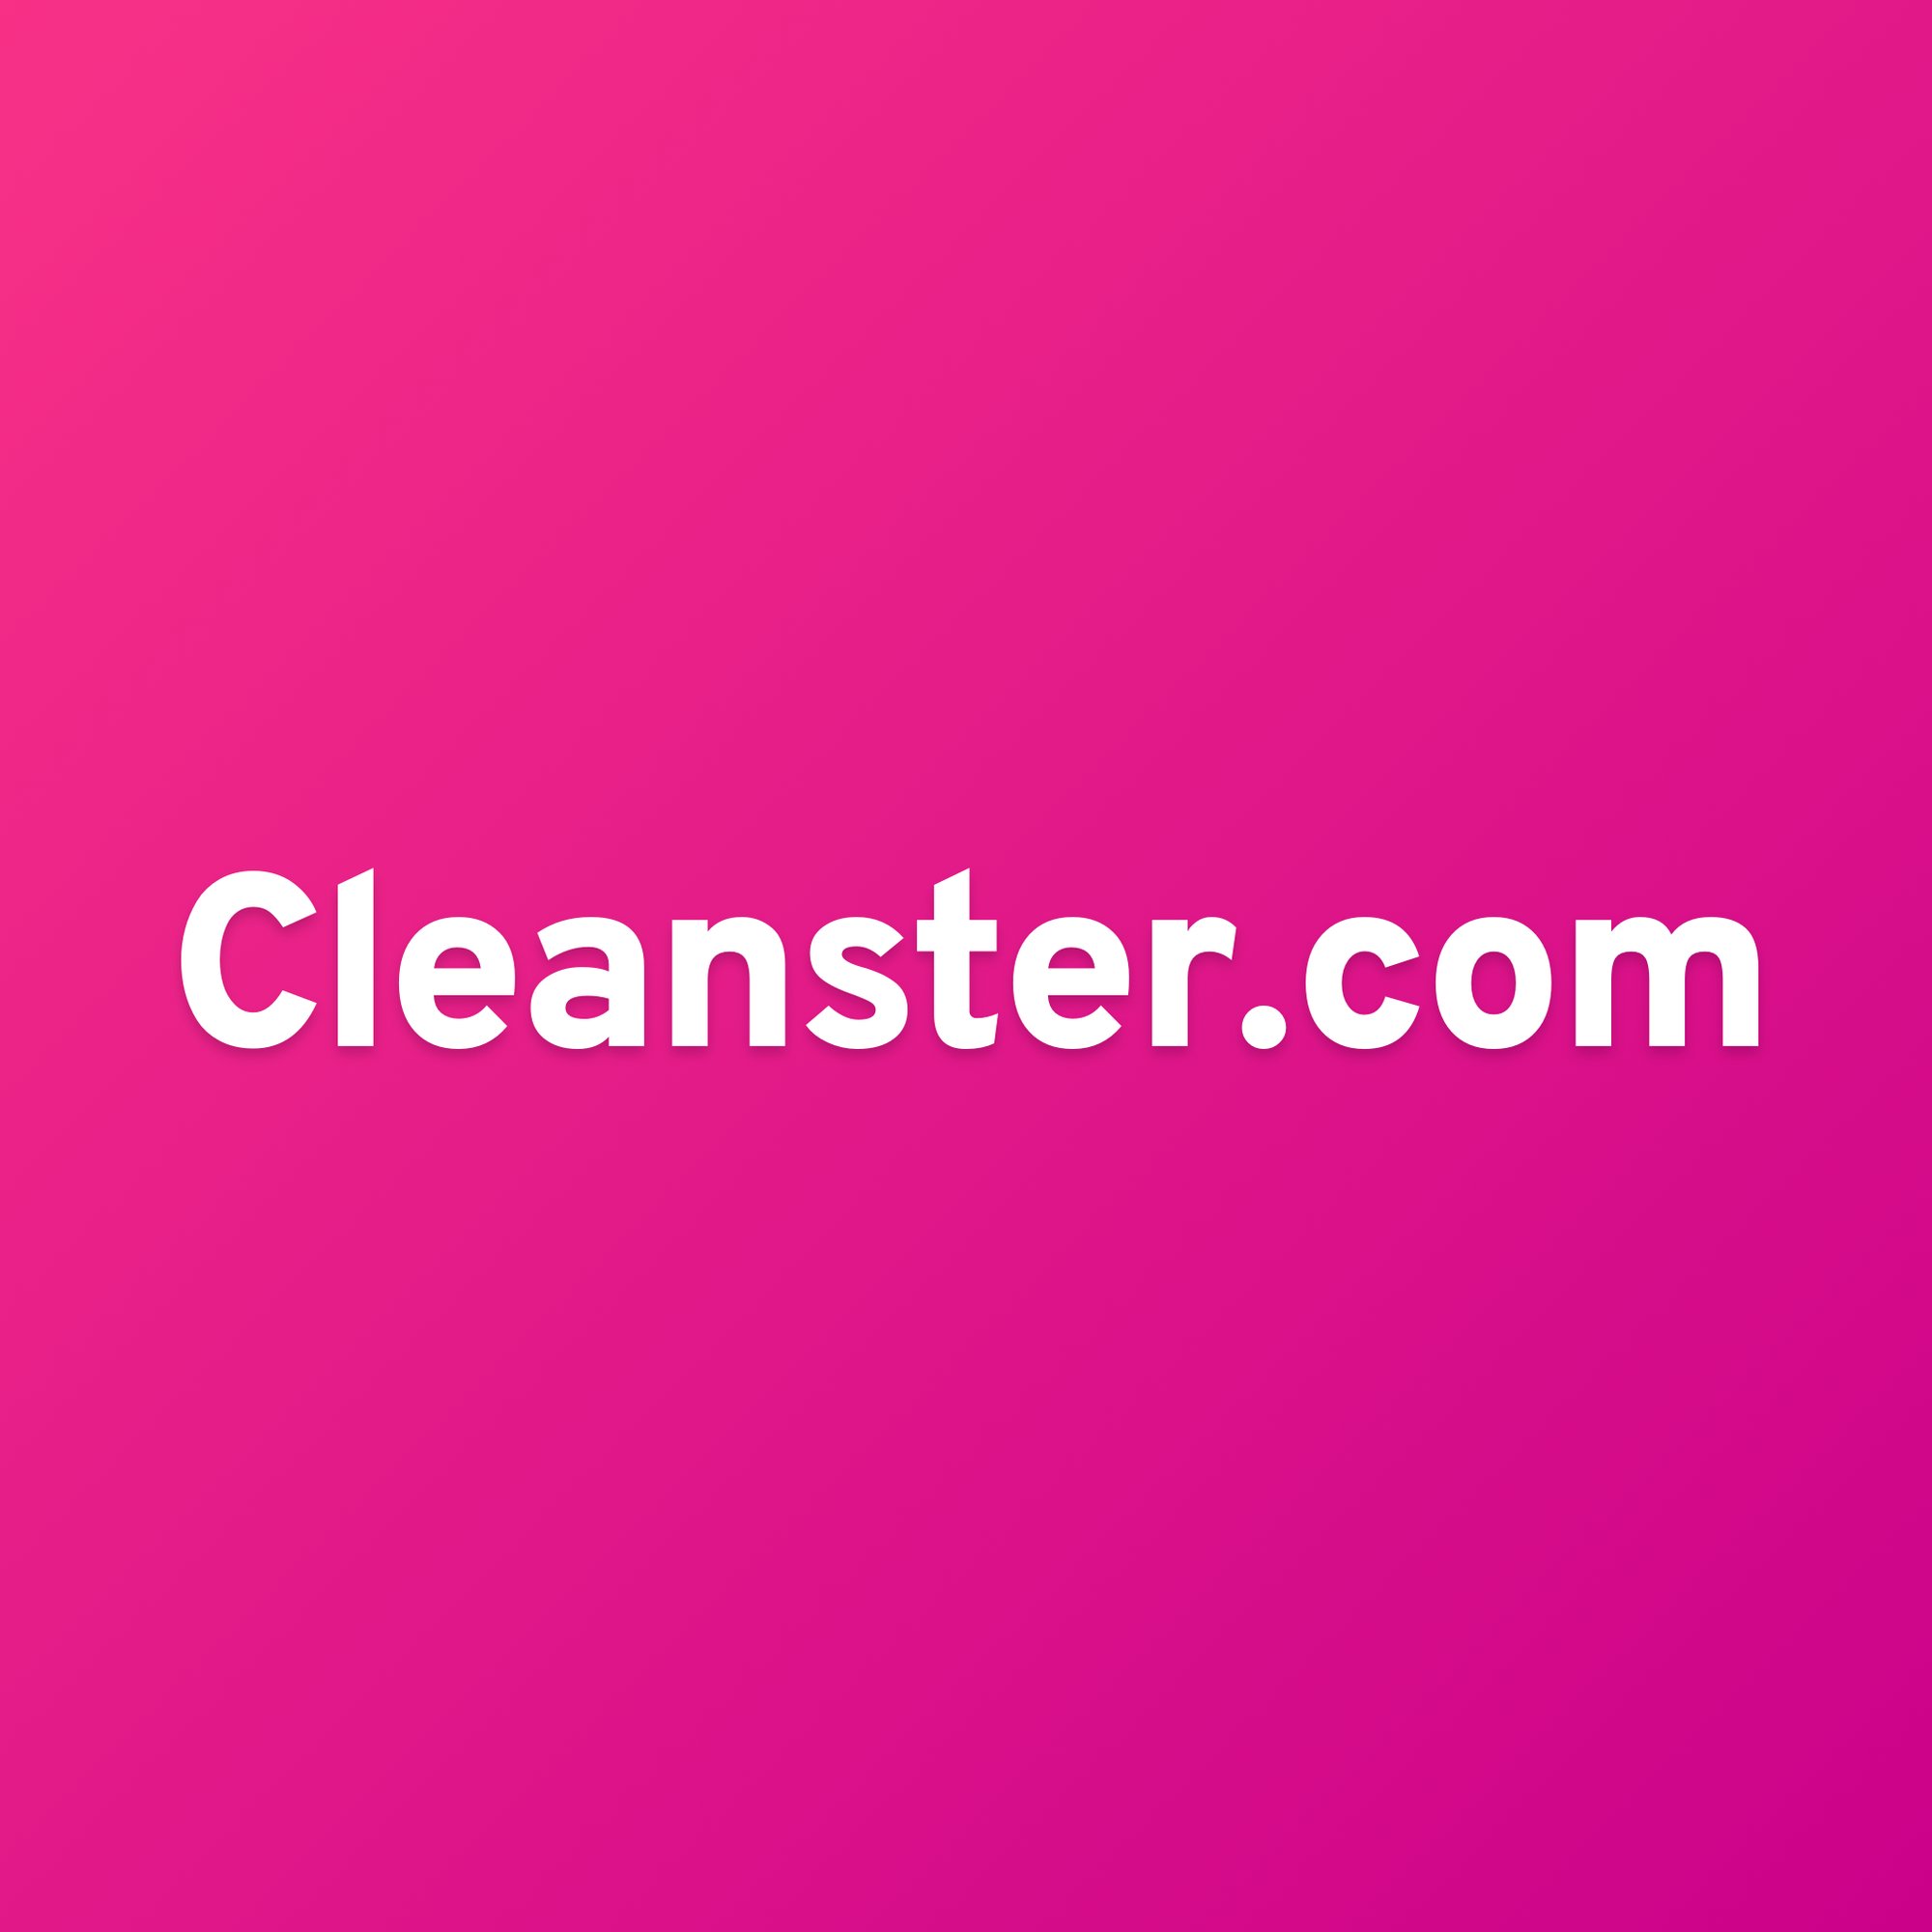 Cleanster Team